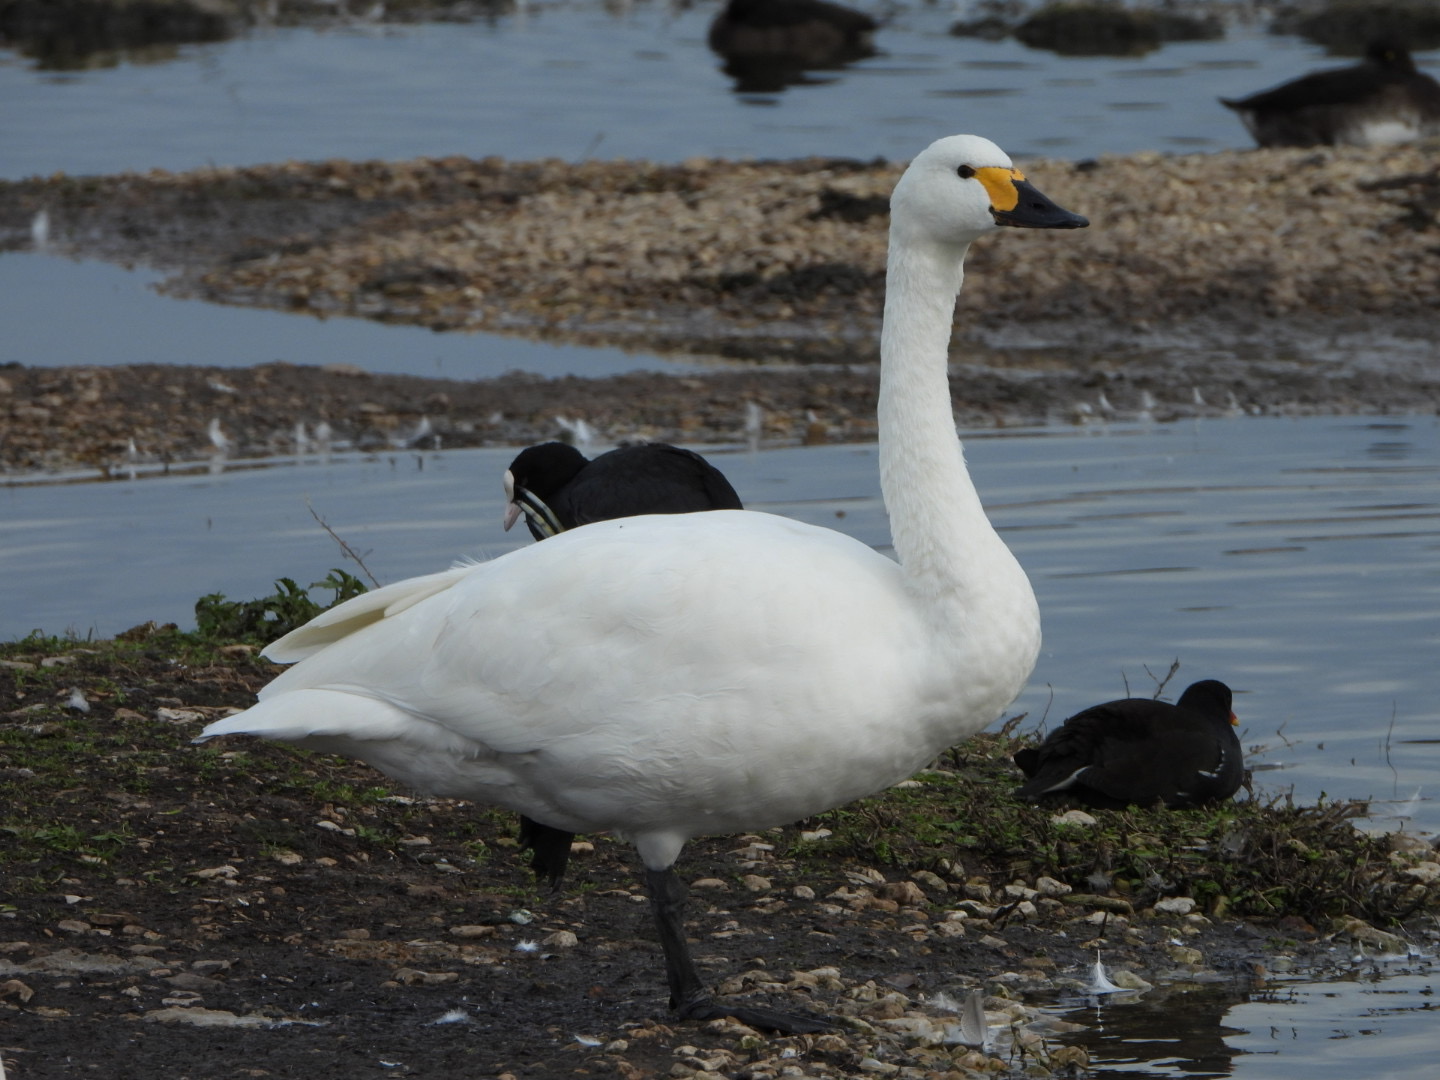 A Berwick SwanSwan – one of the first Bewick Swans to arrive in the UK this winter